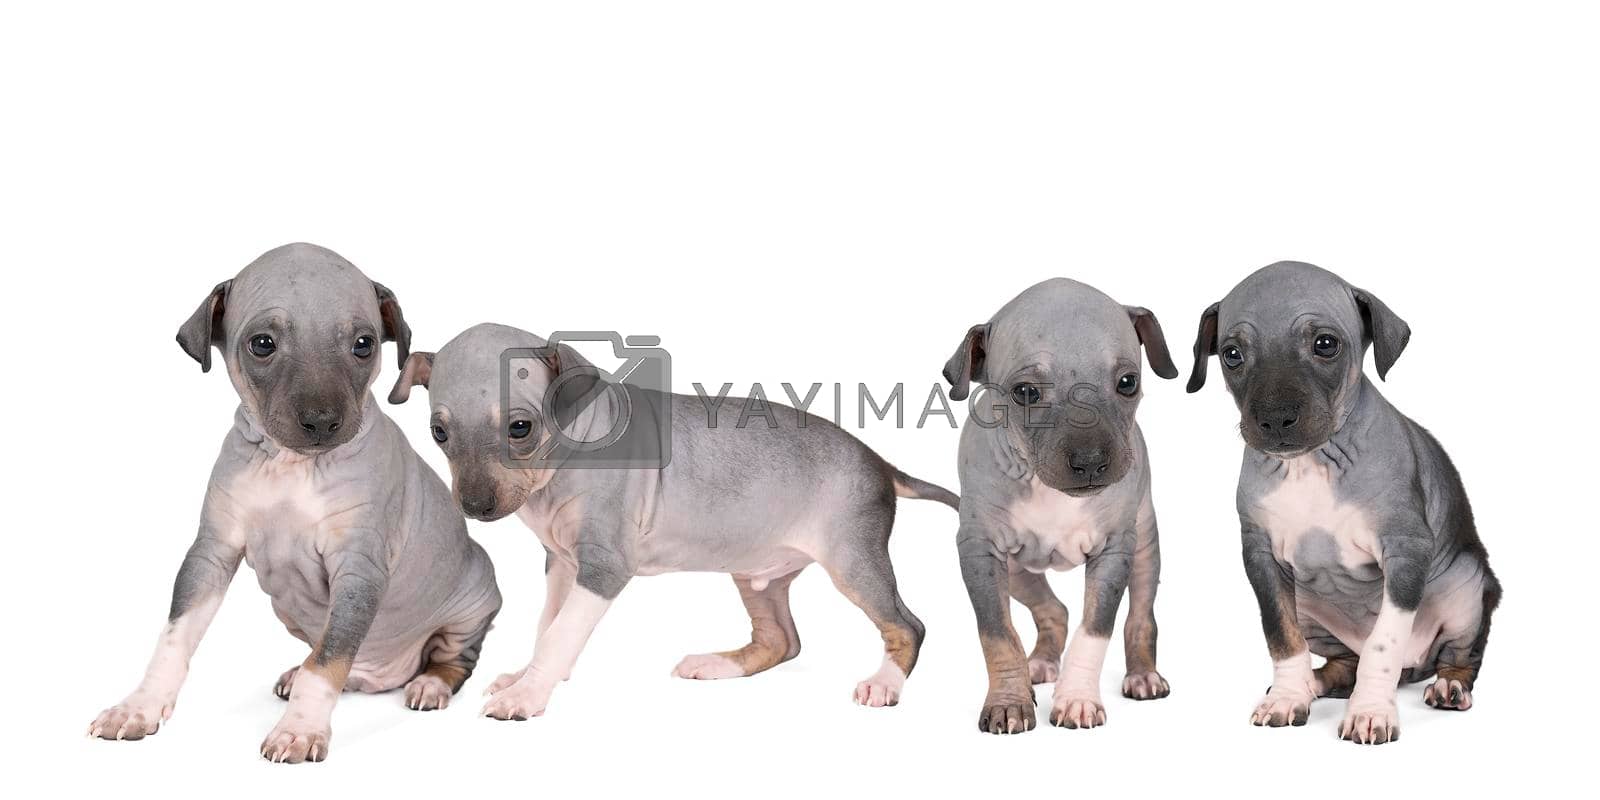 Royalty free image of A panorama of four American Hairless Terrier puppies isolated against white background by LeoniekvanderVliet